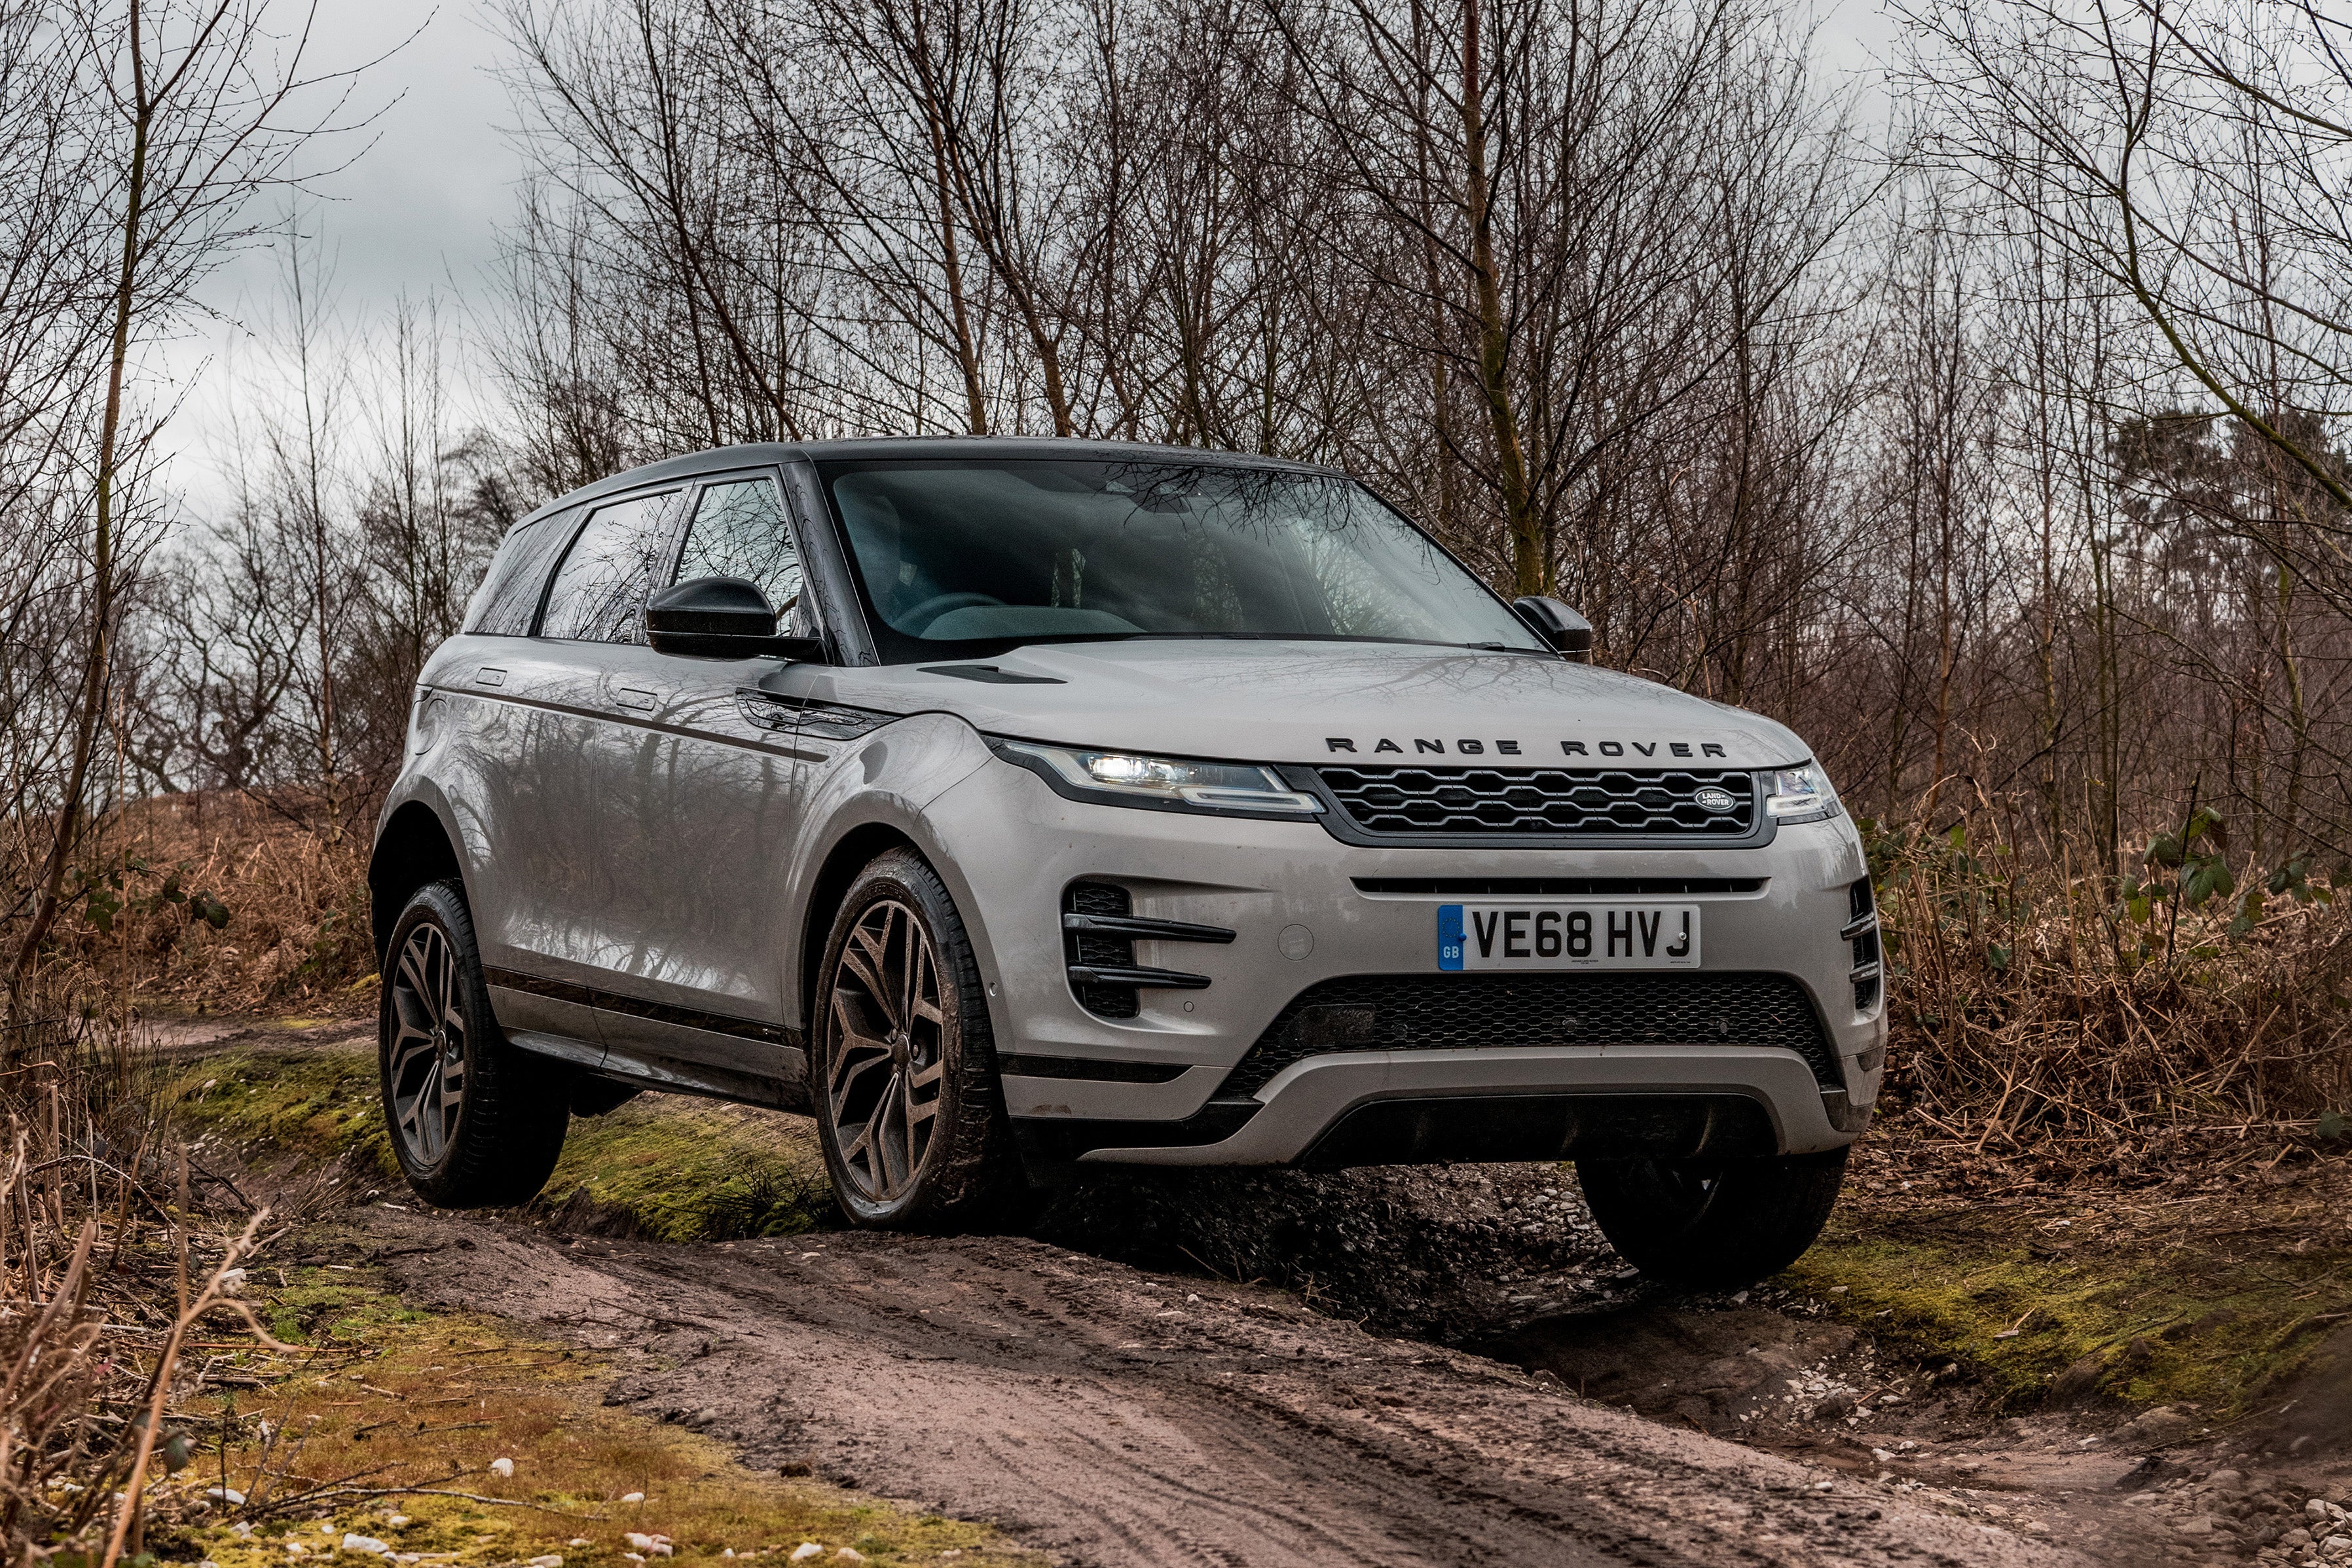 Range Rover Evoque Review 2022: front right exterior